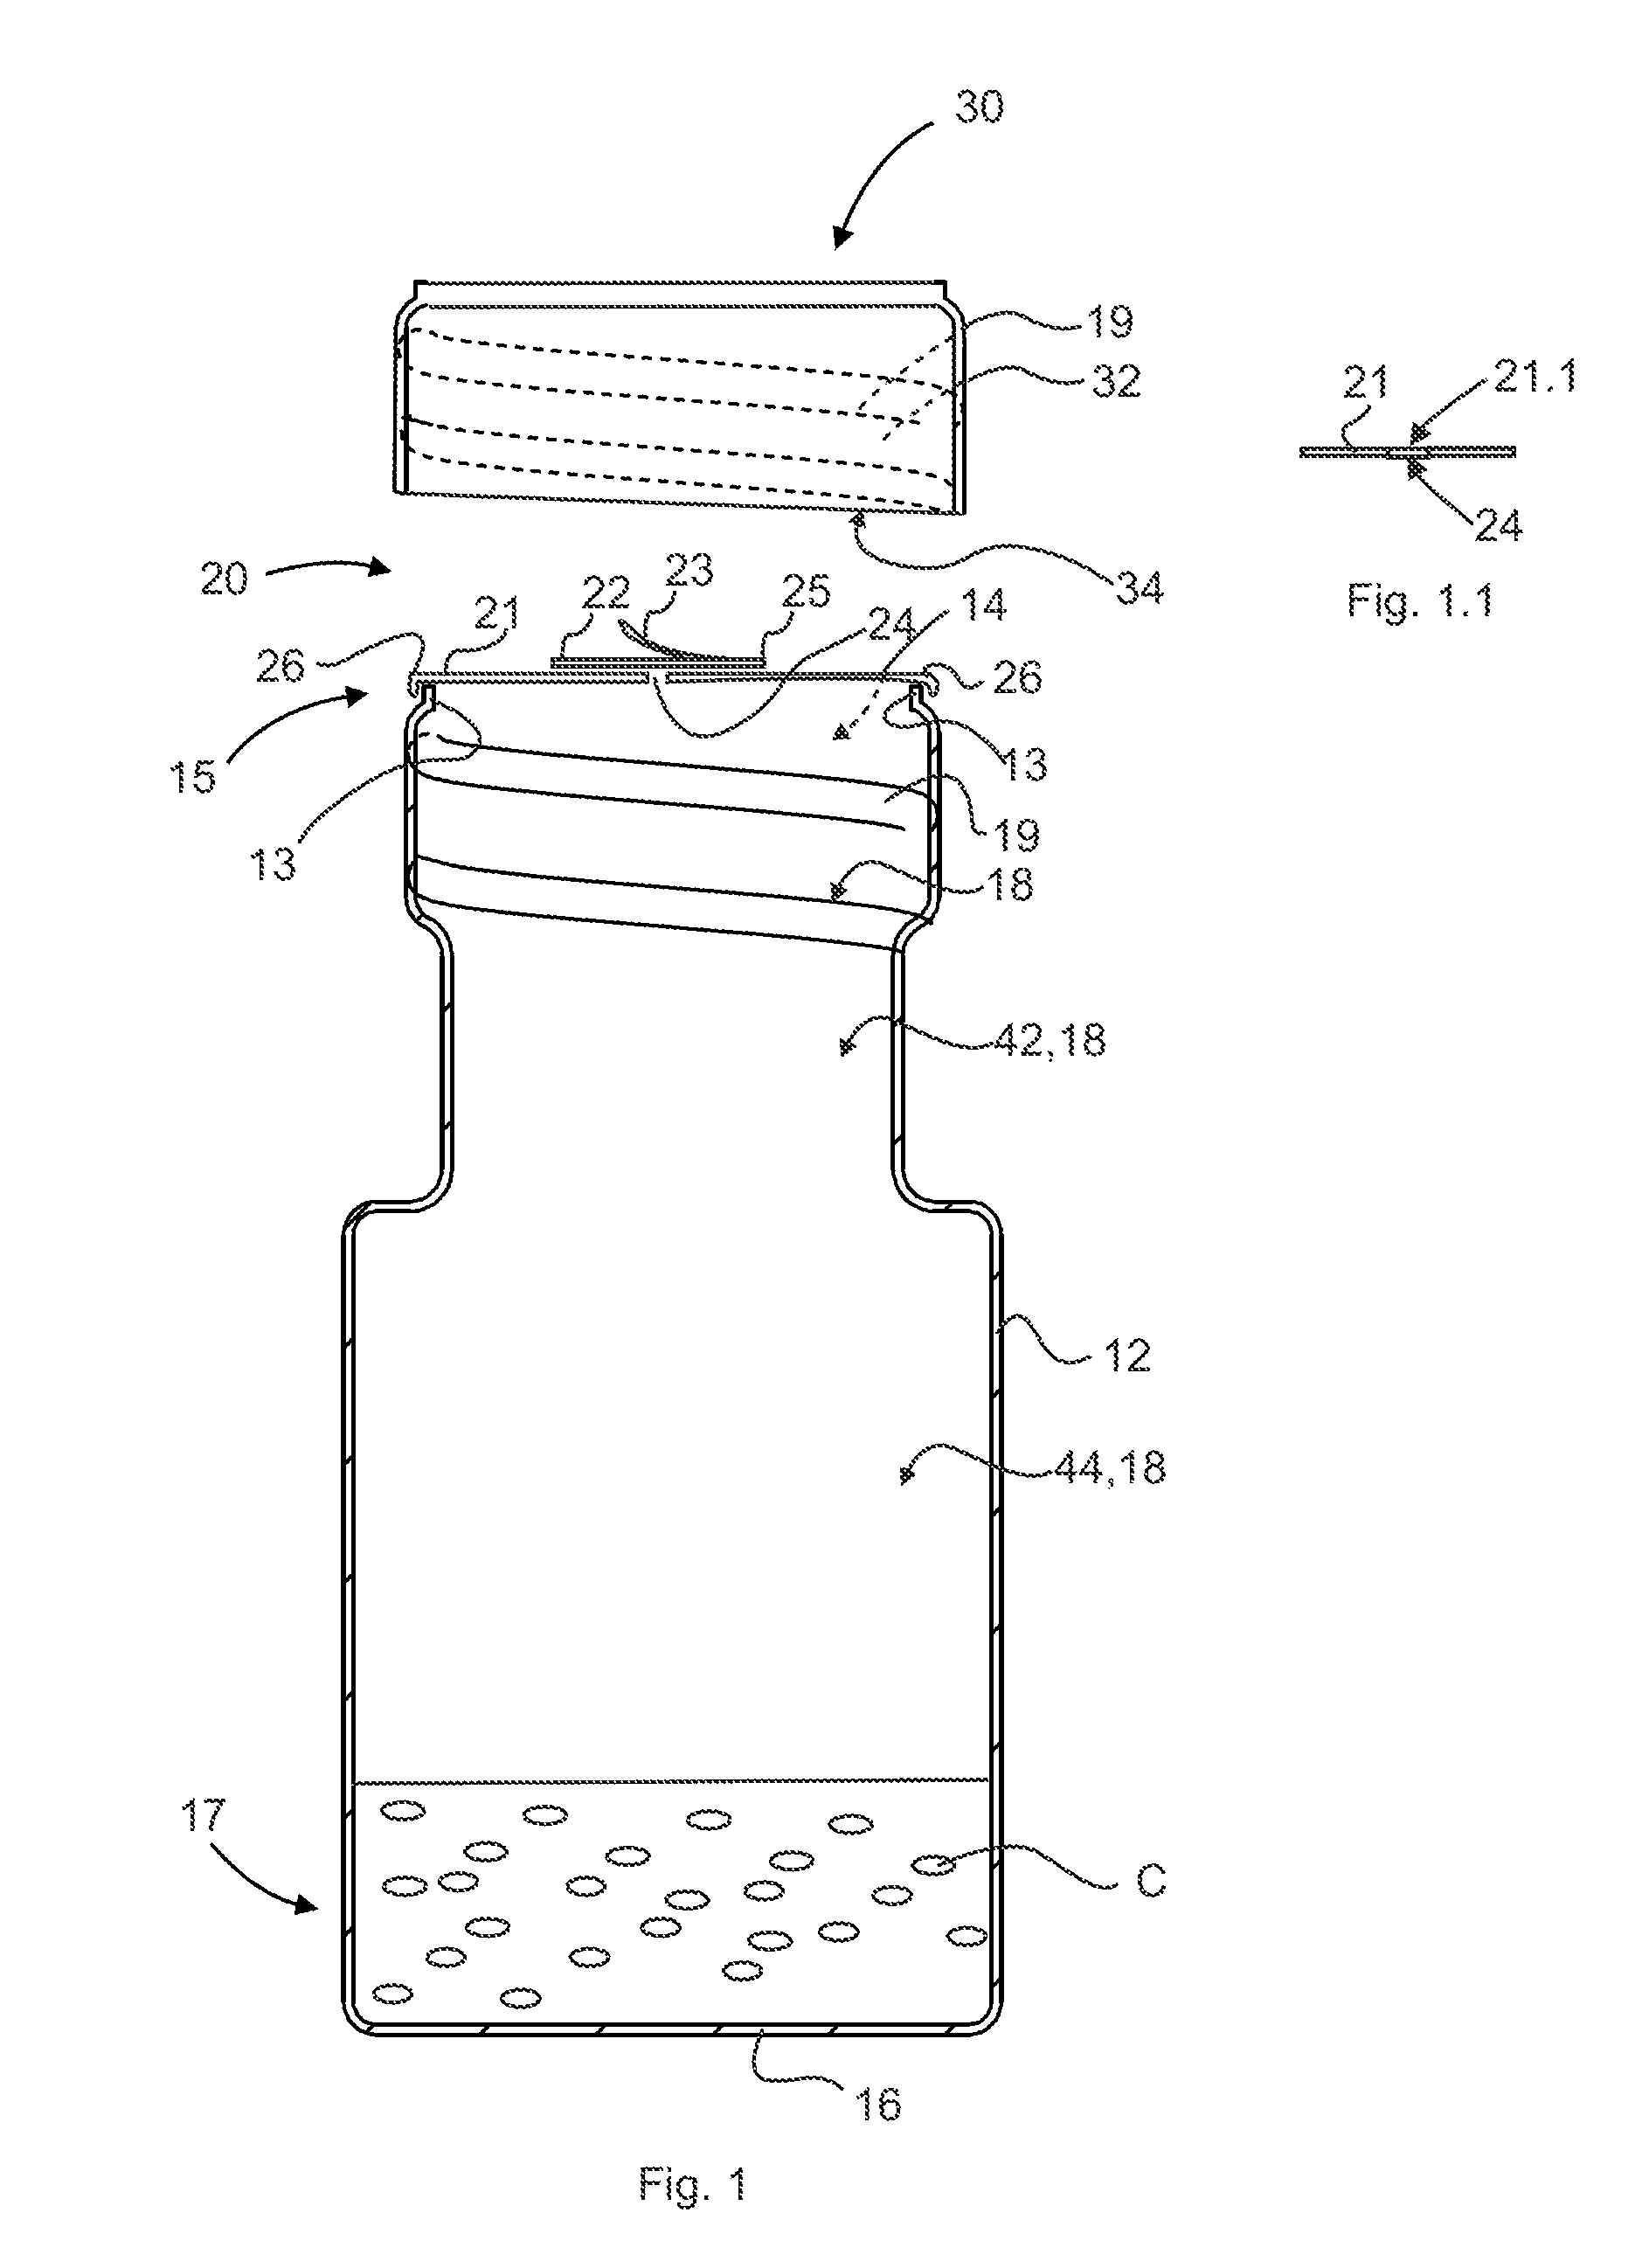 Drizzle safety seal and methods of use